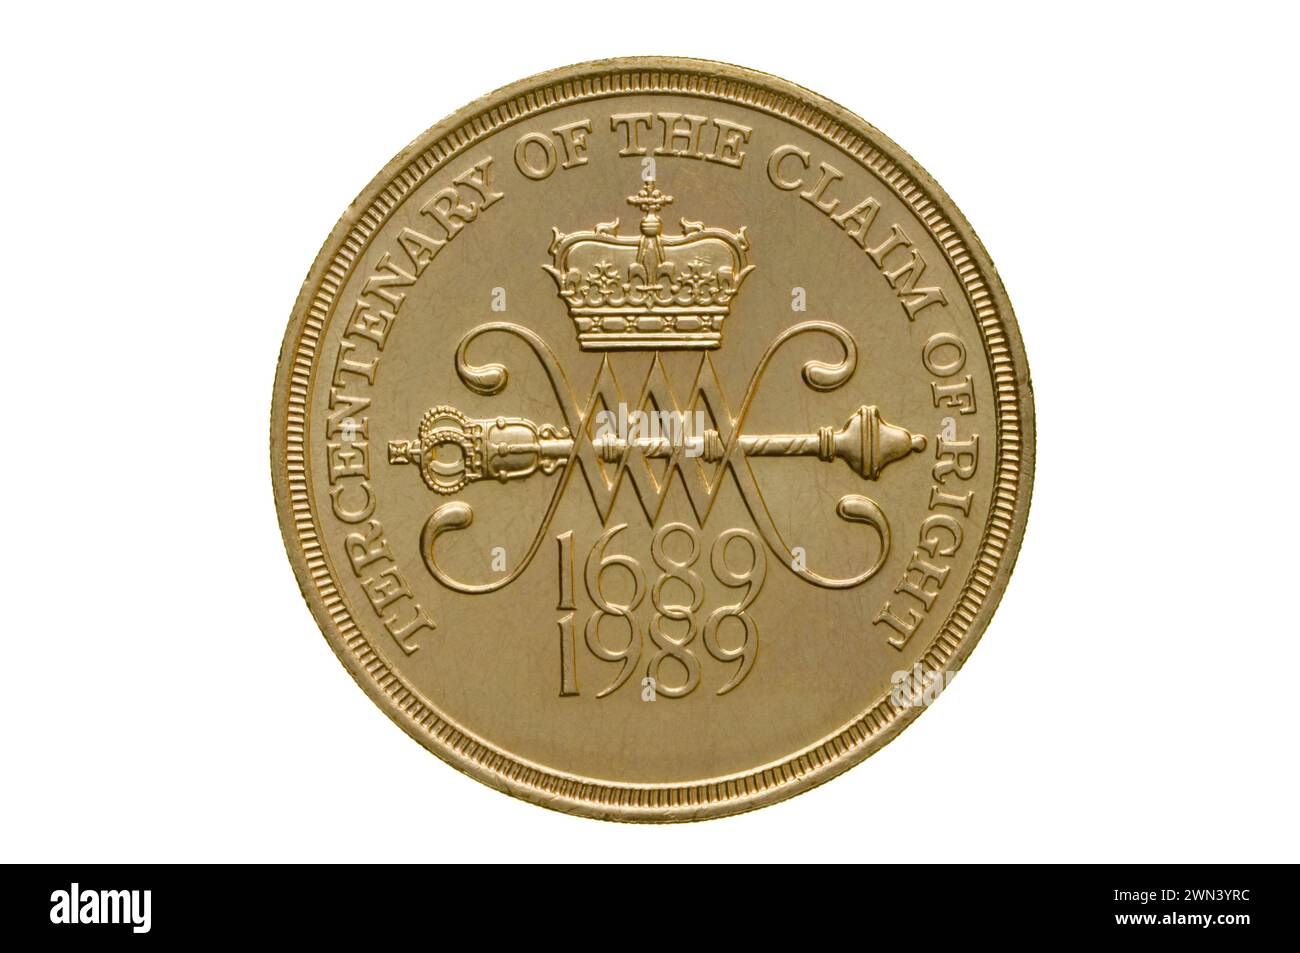 Claim of Right Two Pound coin Stock Photo